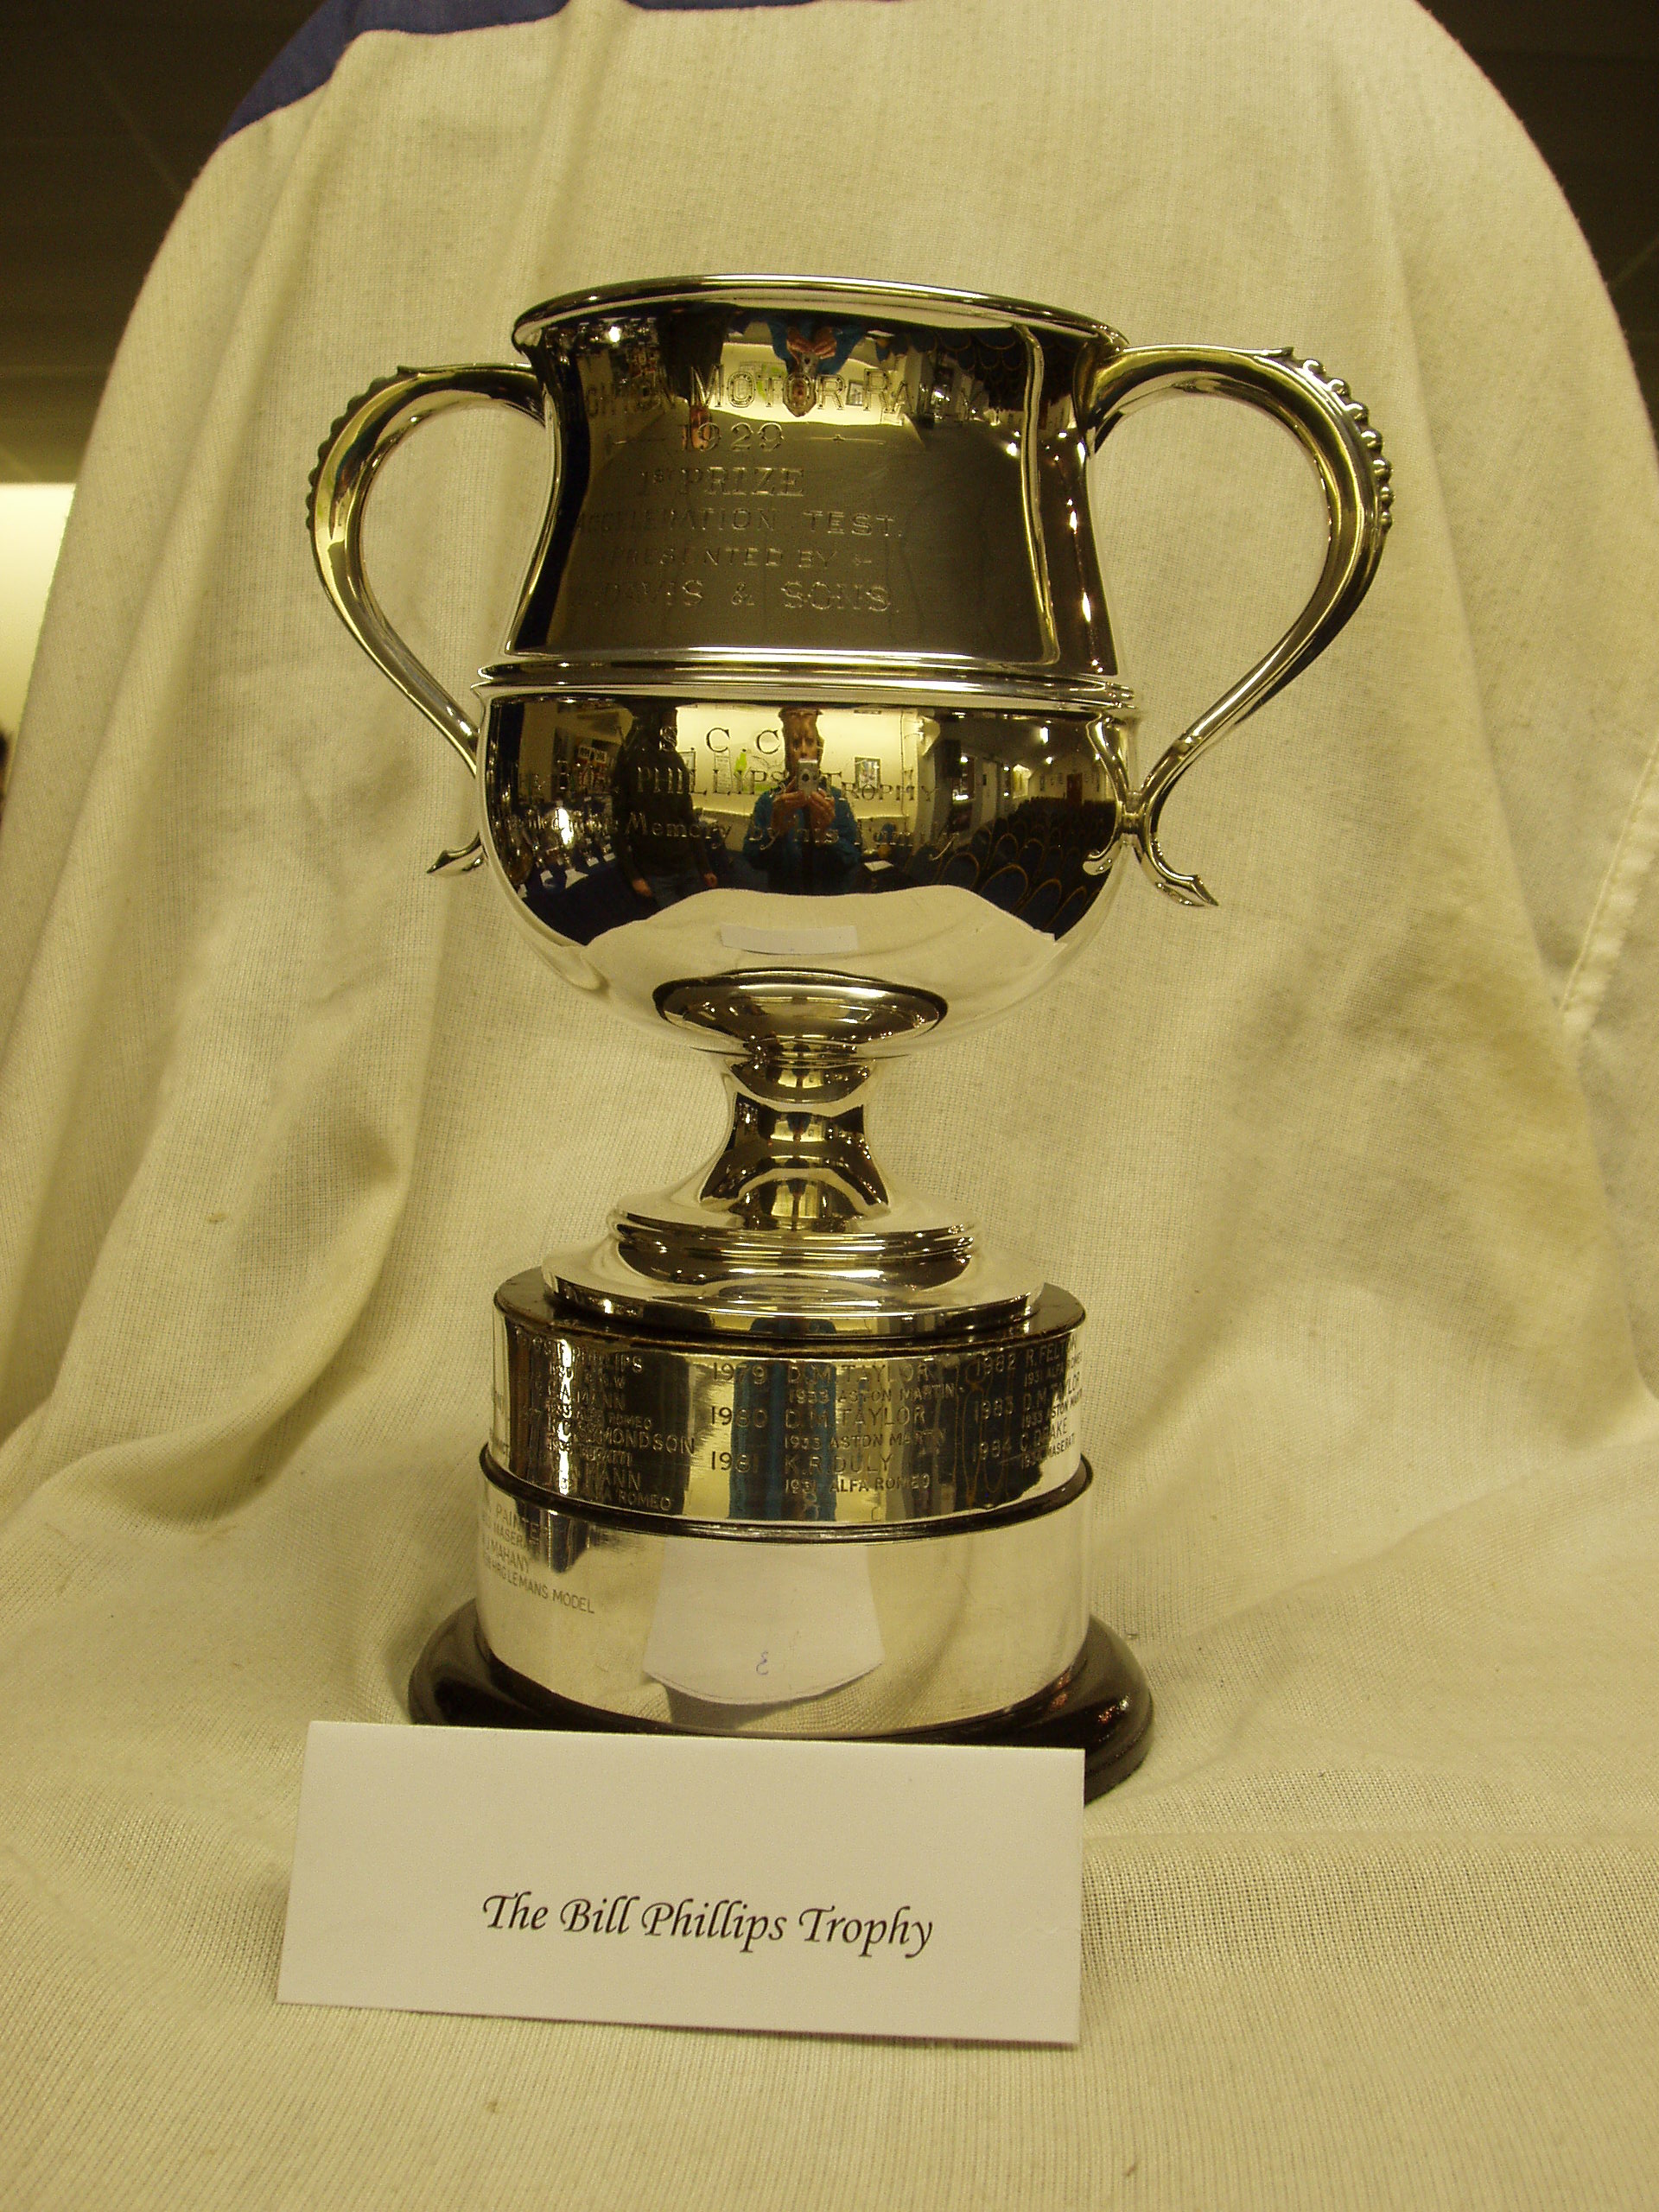 BILL PHILIPS TROPHY cover